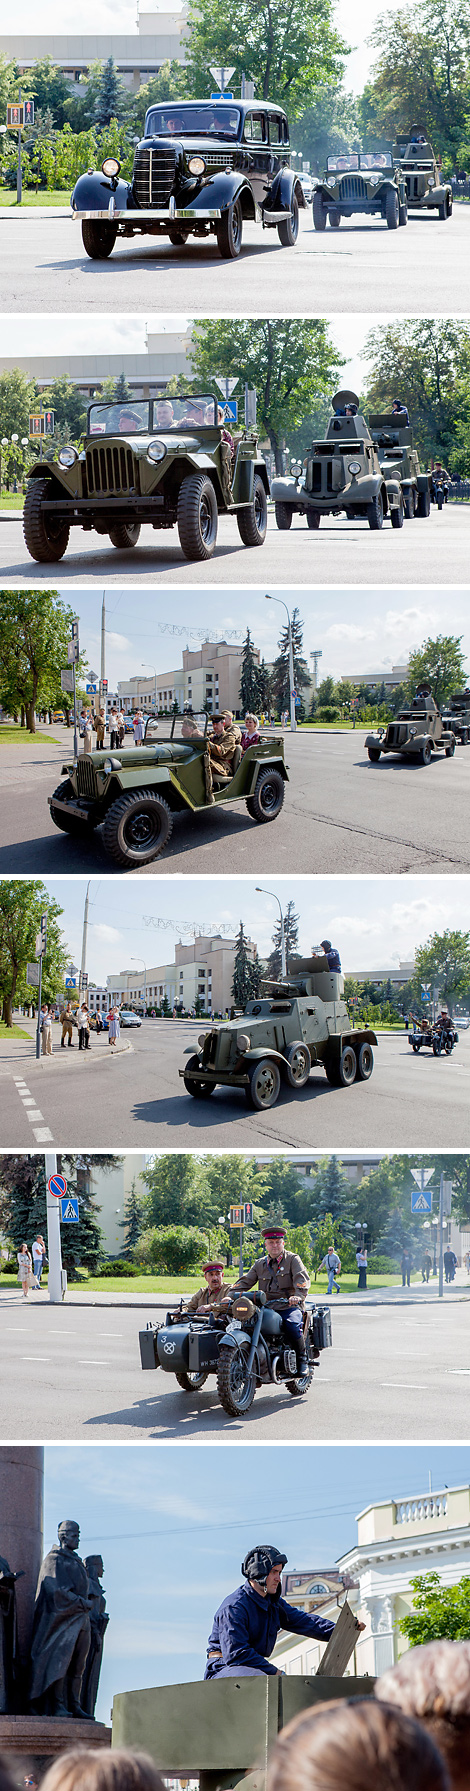 Parade of military reenactment units in the streets of Brest